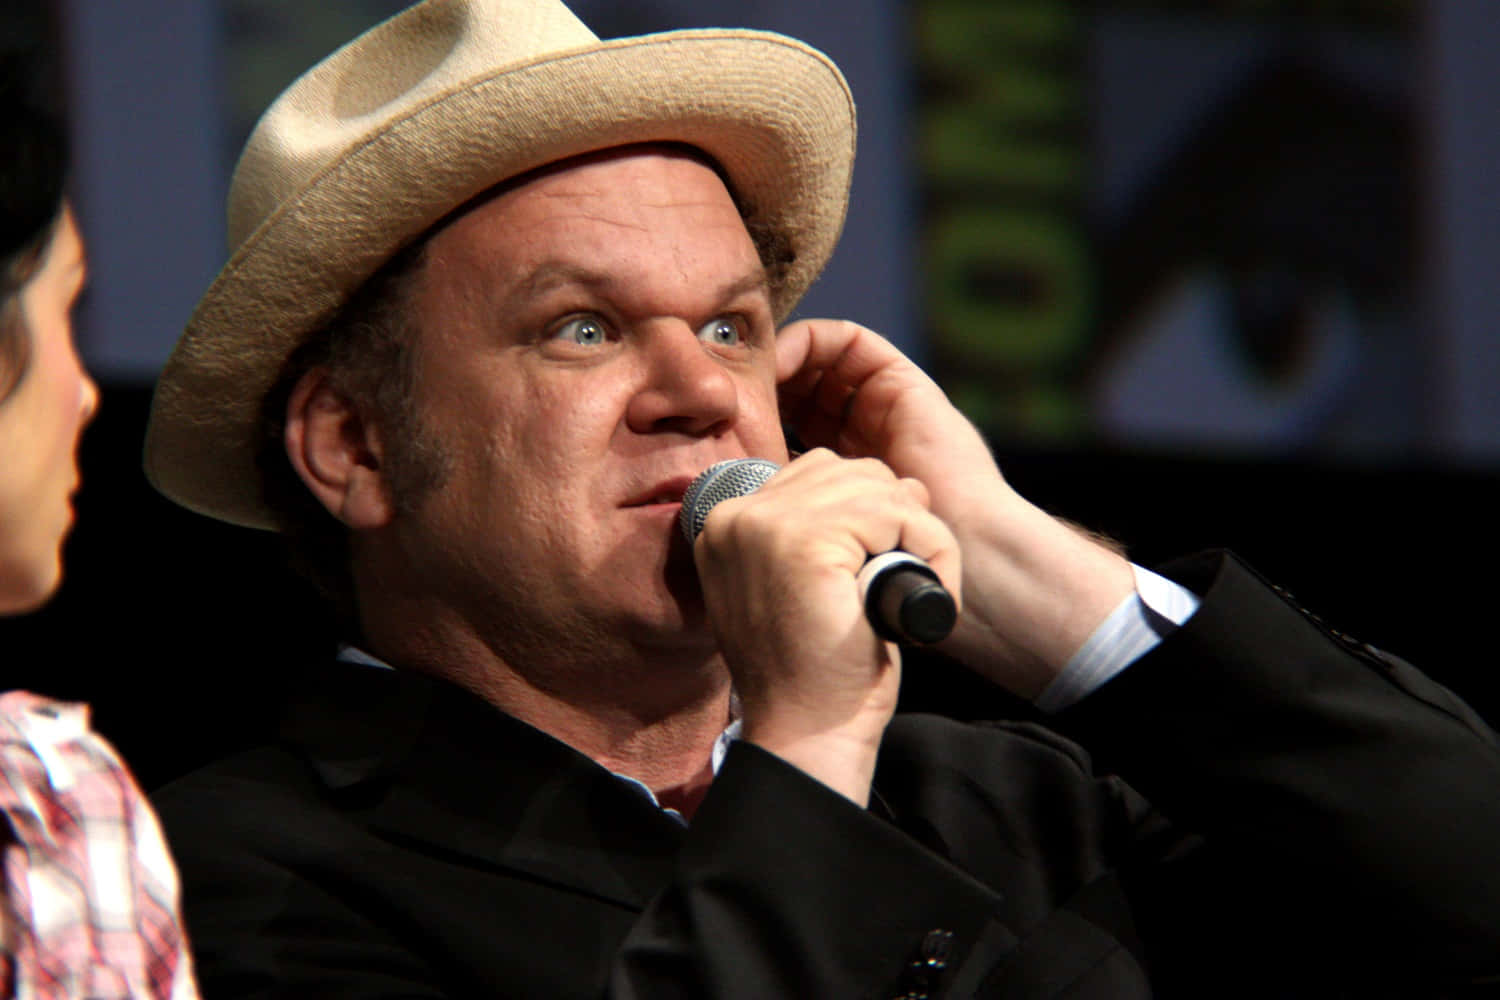 John C. Reilly striking a candid pose against a white background Wallpaper